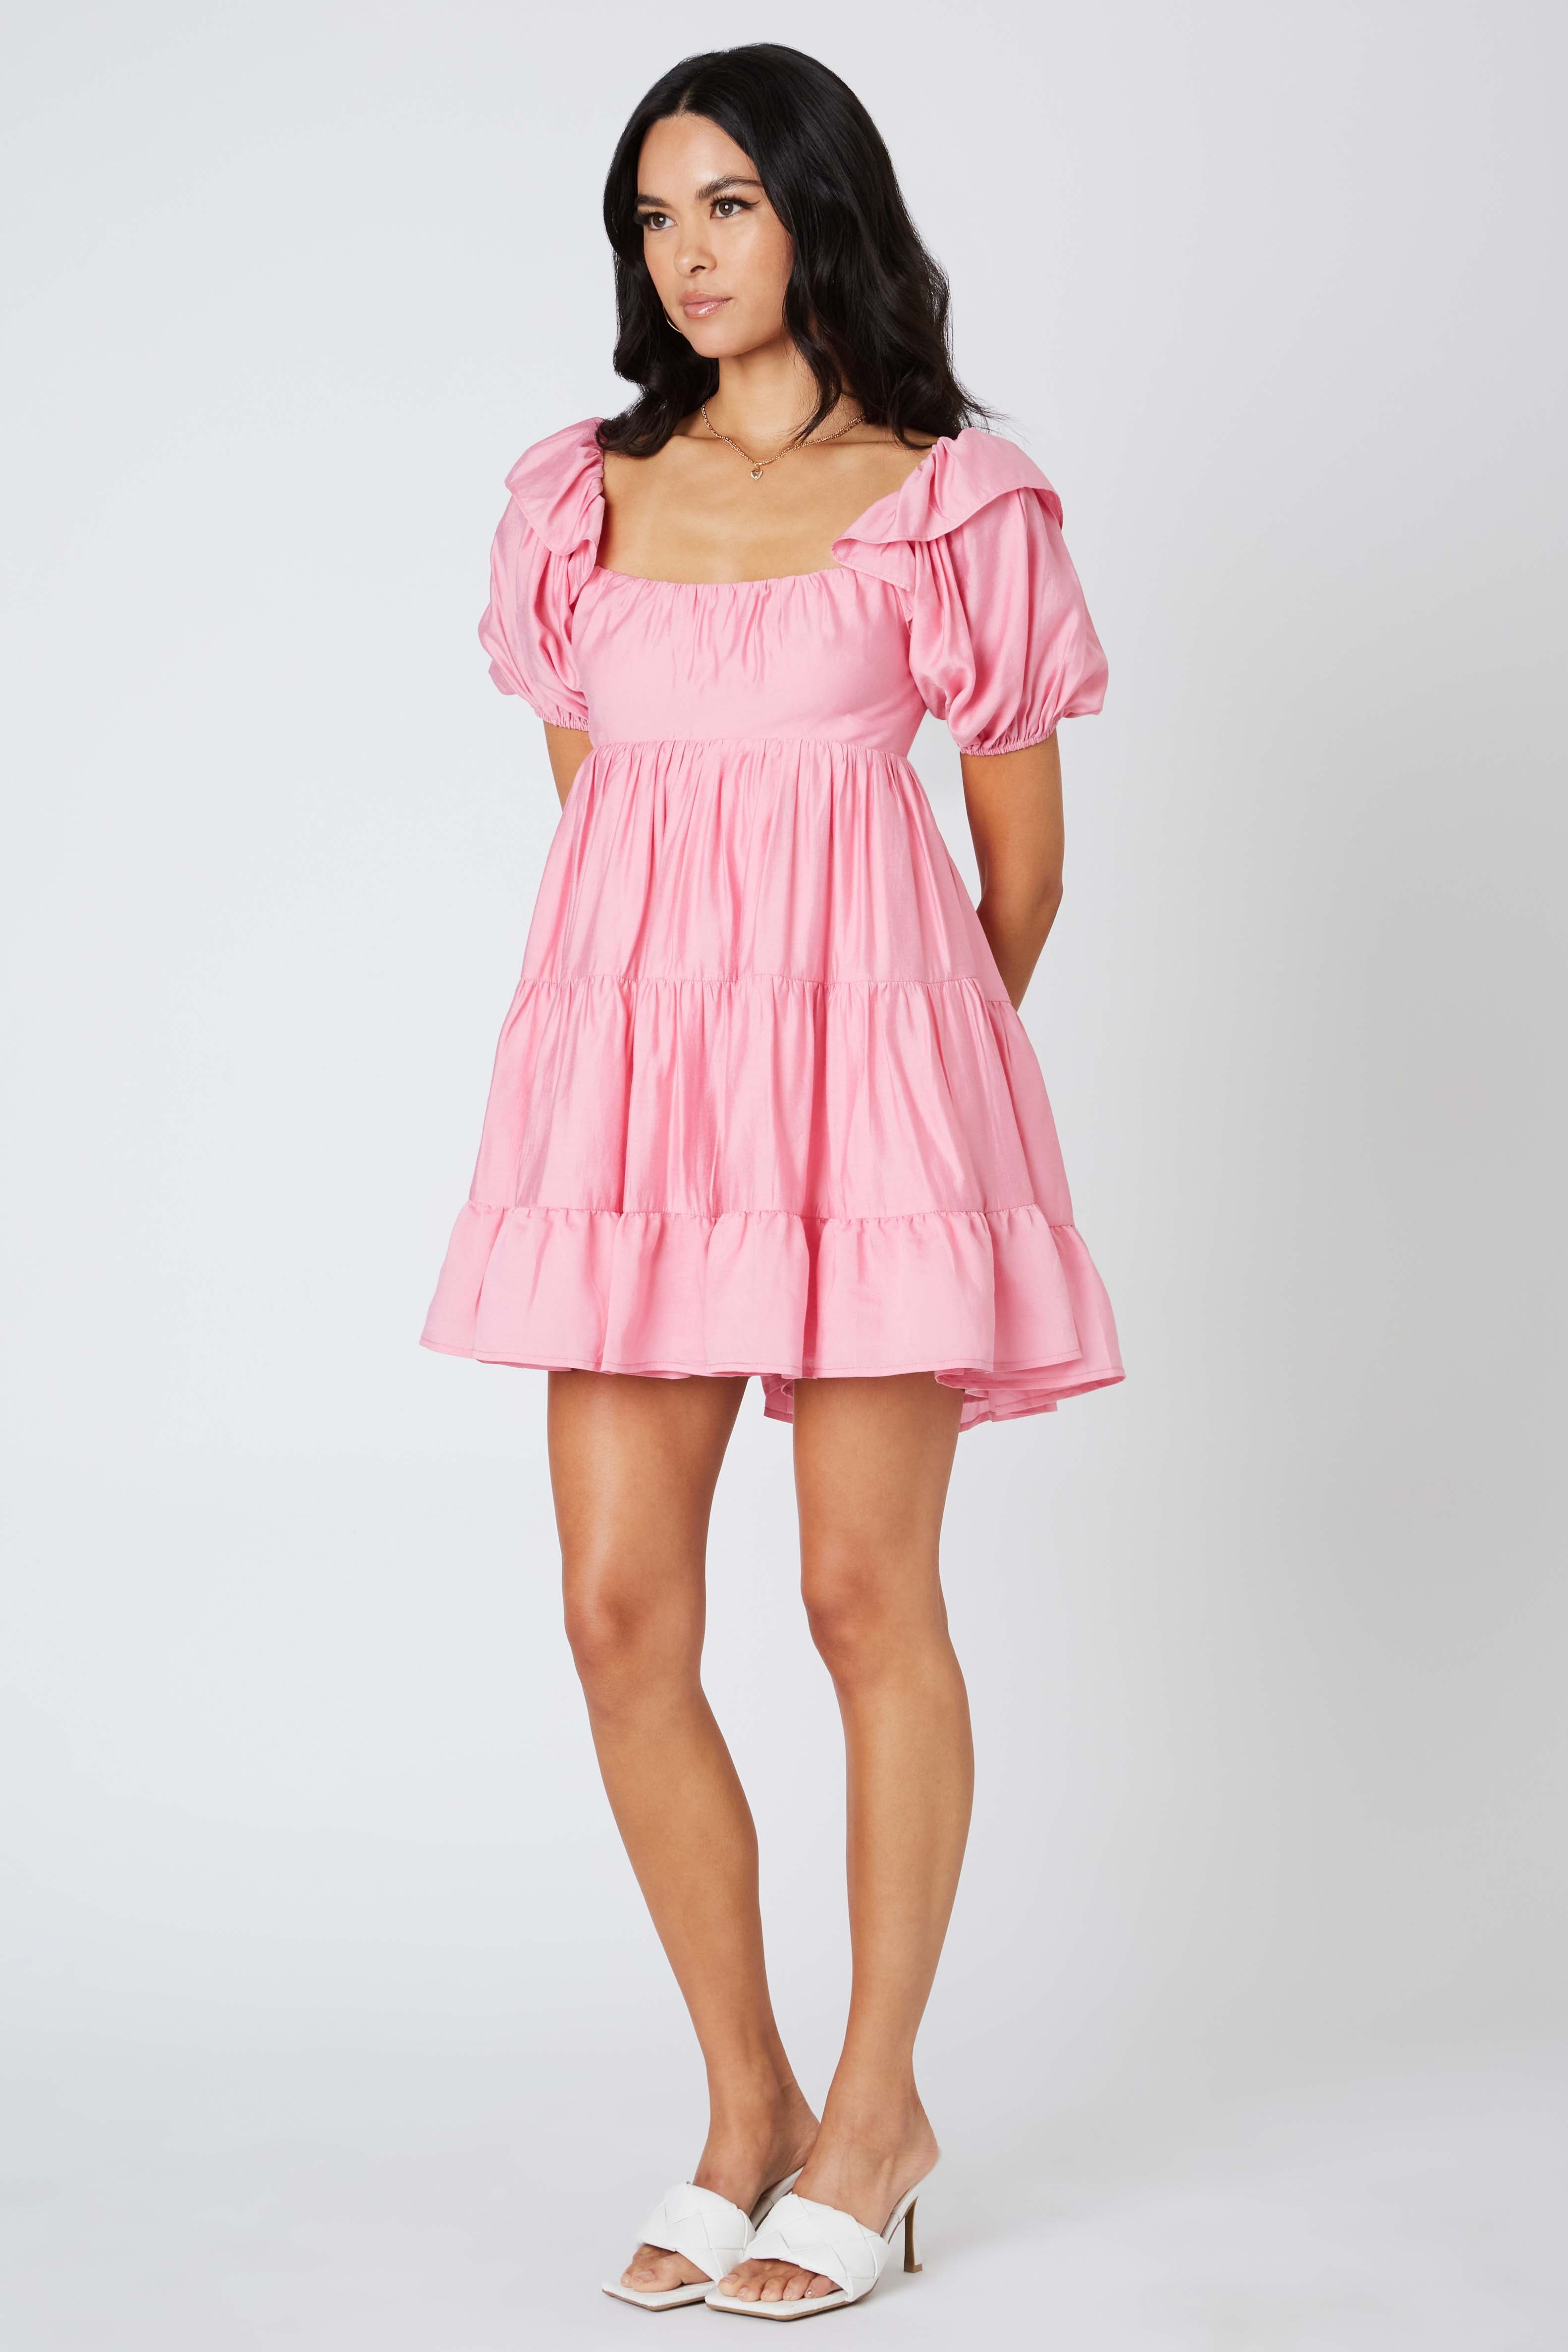 Puff Sleeve Babydoll Dress in Pink Side View